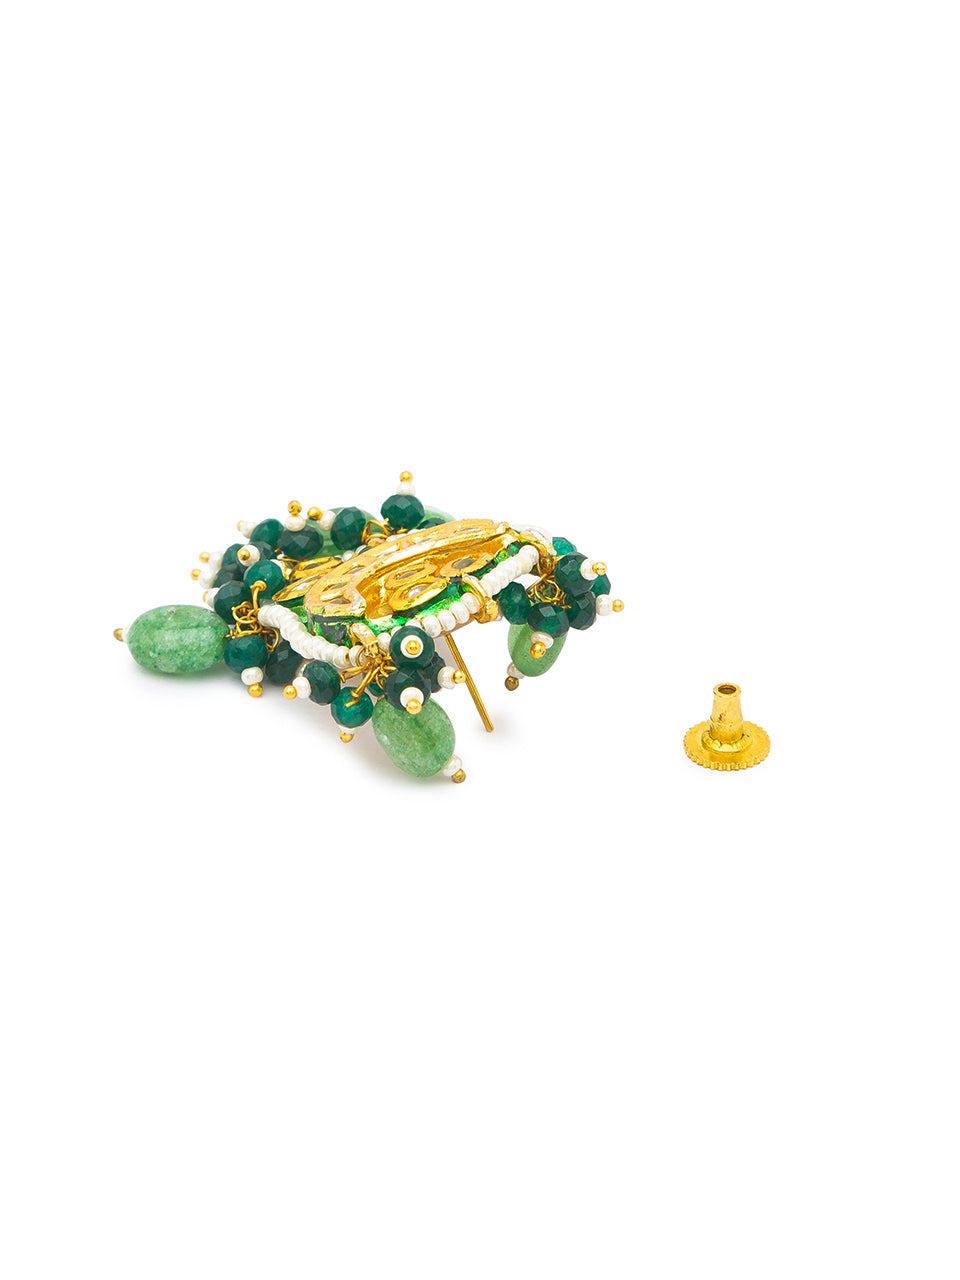 Golden Polish Brass, Necklace with Green Agates, Glass Pearls & Onyx Tumbles